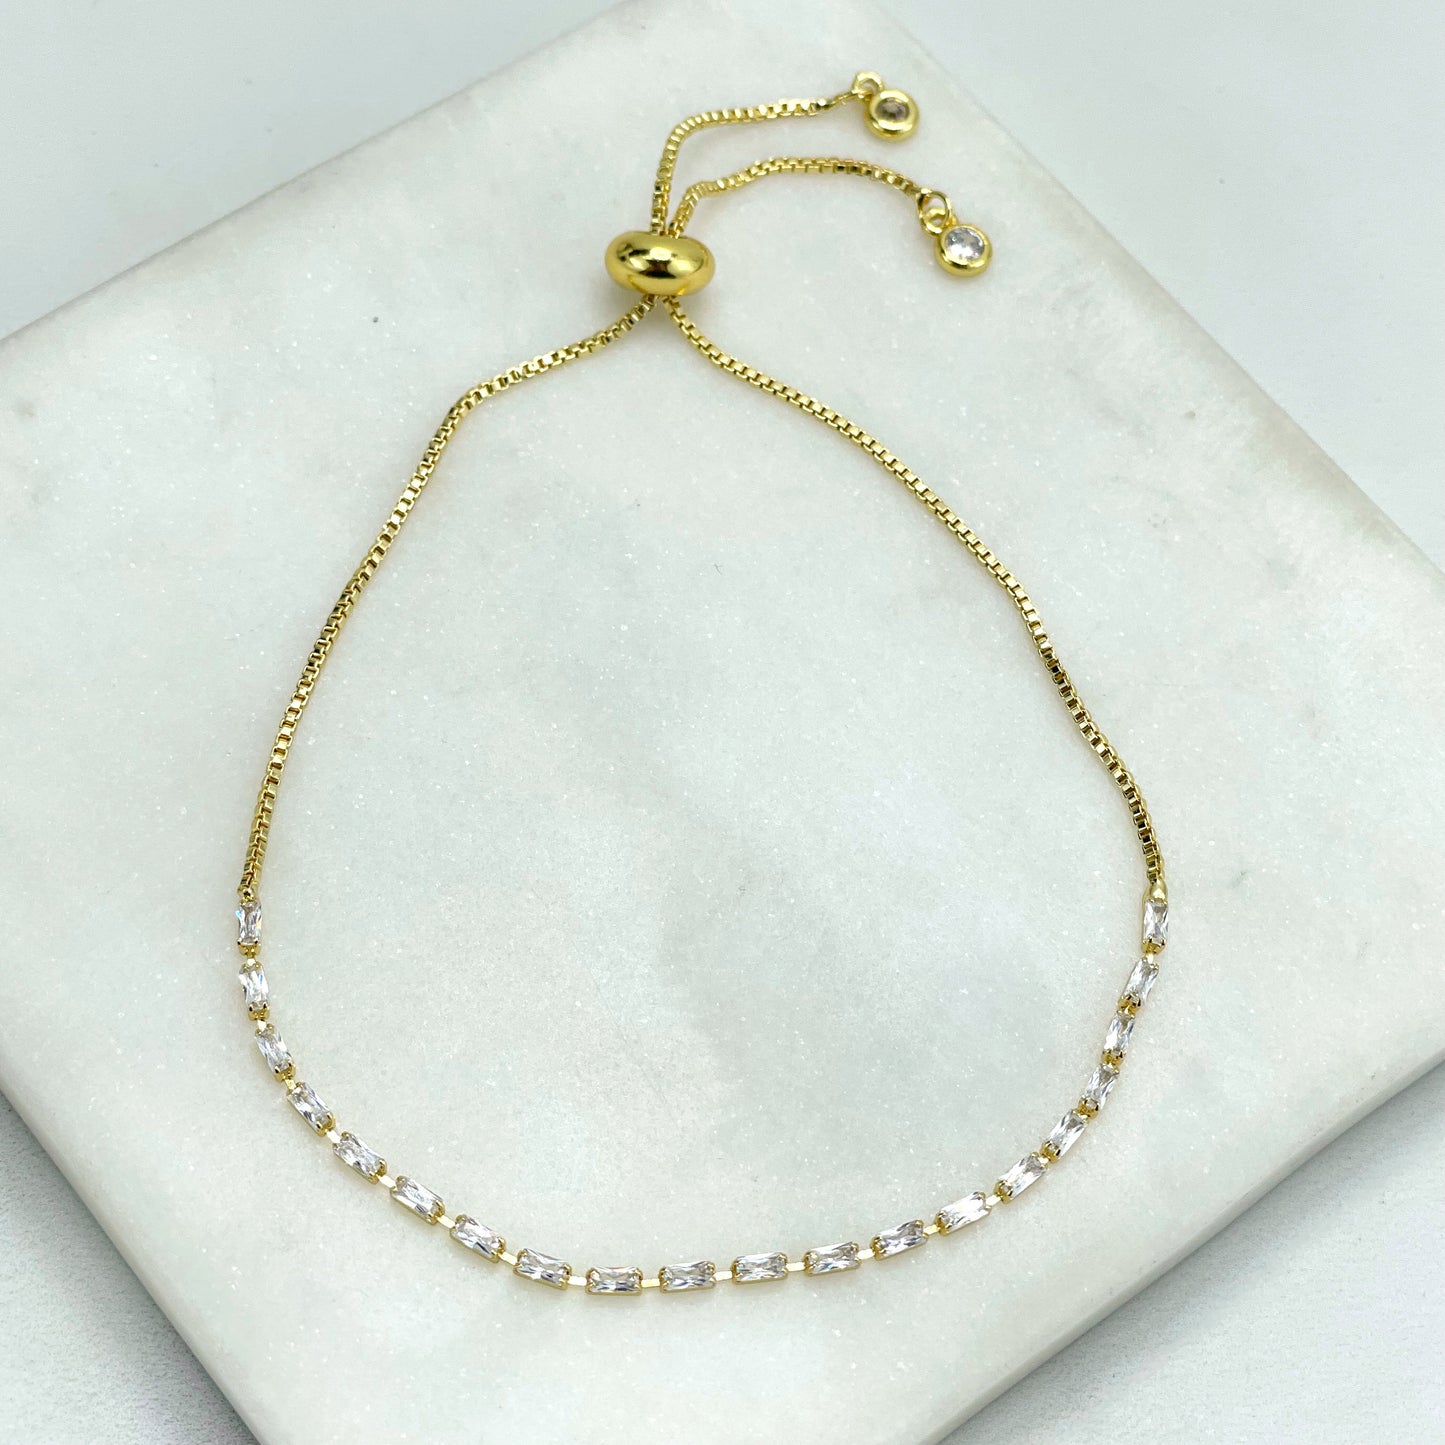 18k Gold Filled Box Chain & Clear Cubic Zirconia Slide Clasp Tennis Linked Bracelet, 3 Different Sizes, Wholesale Jewelry Making Supplies